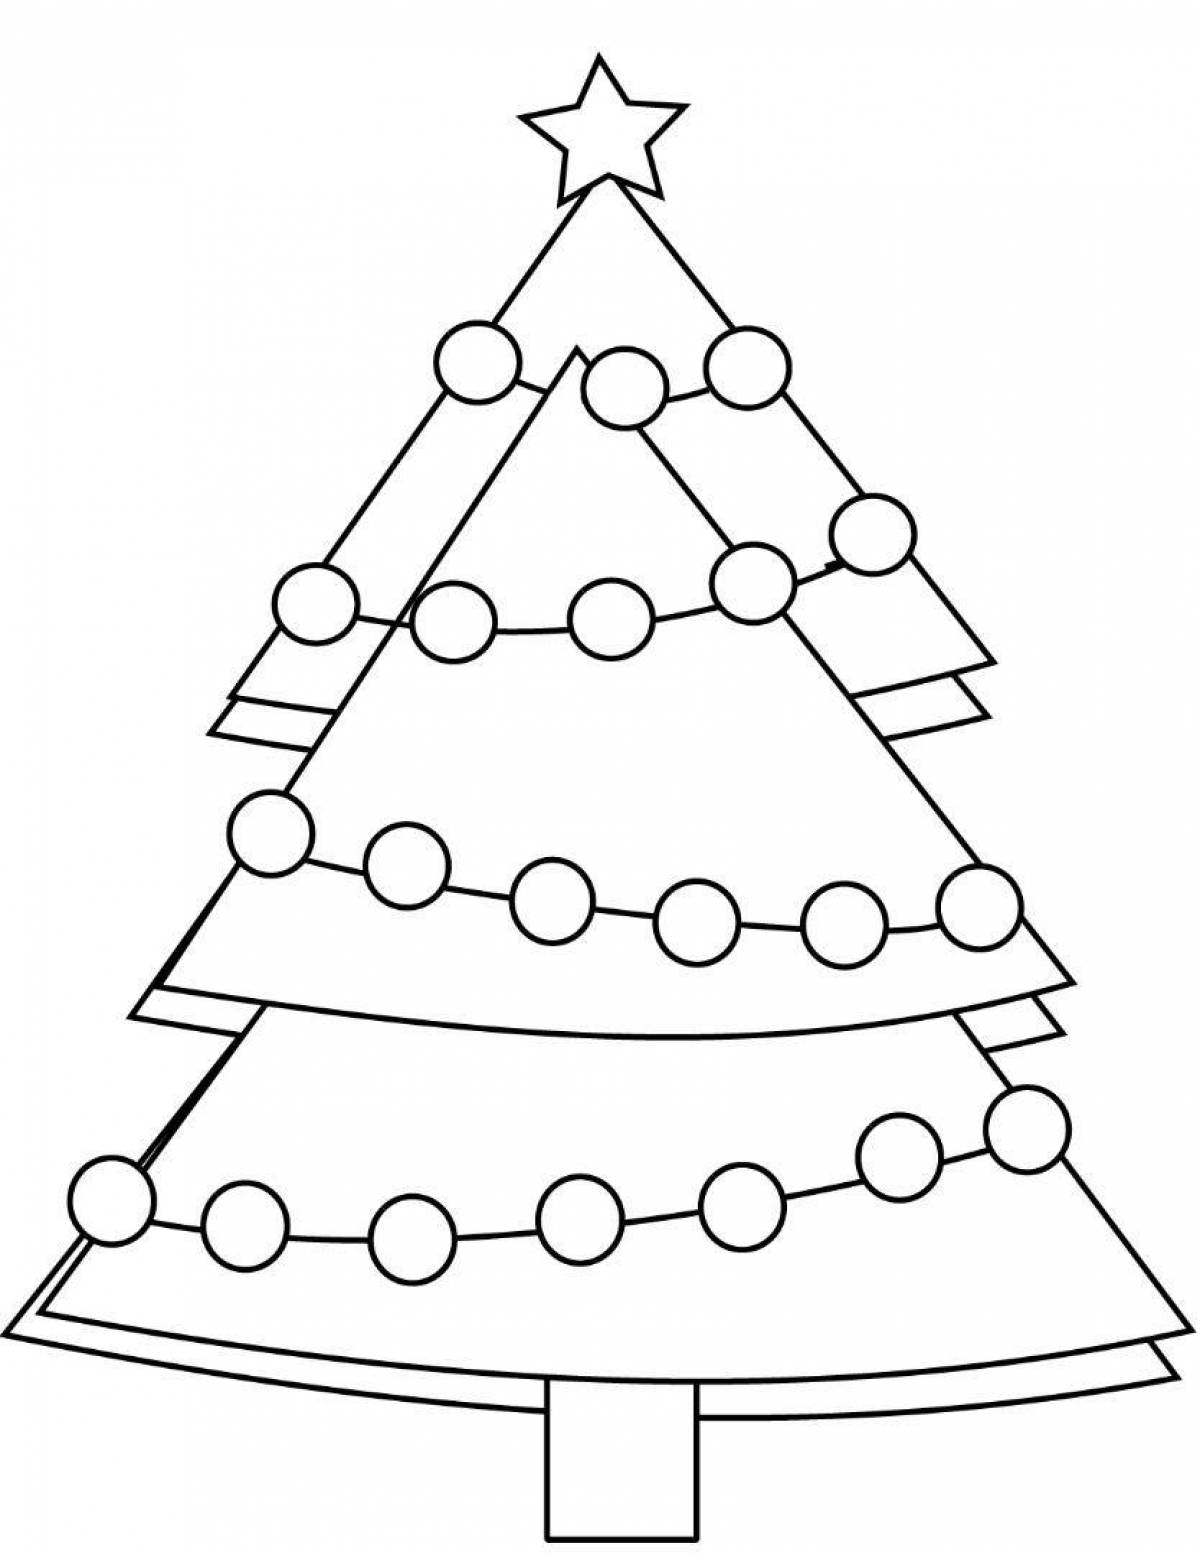 Glorious Christmas tree coloring book for 5-6 year olds